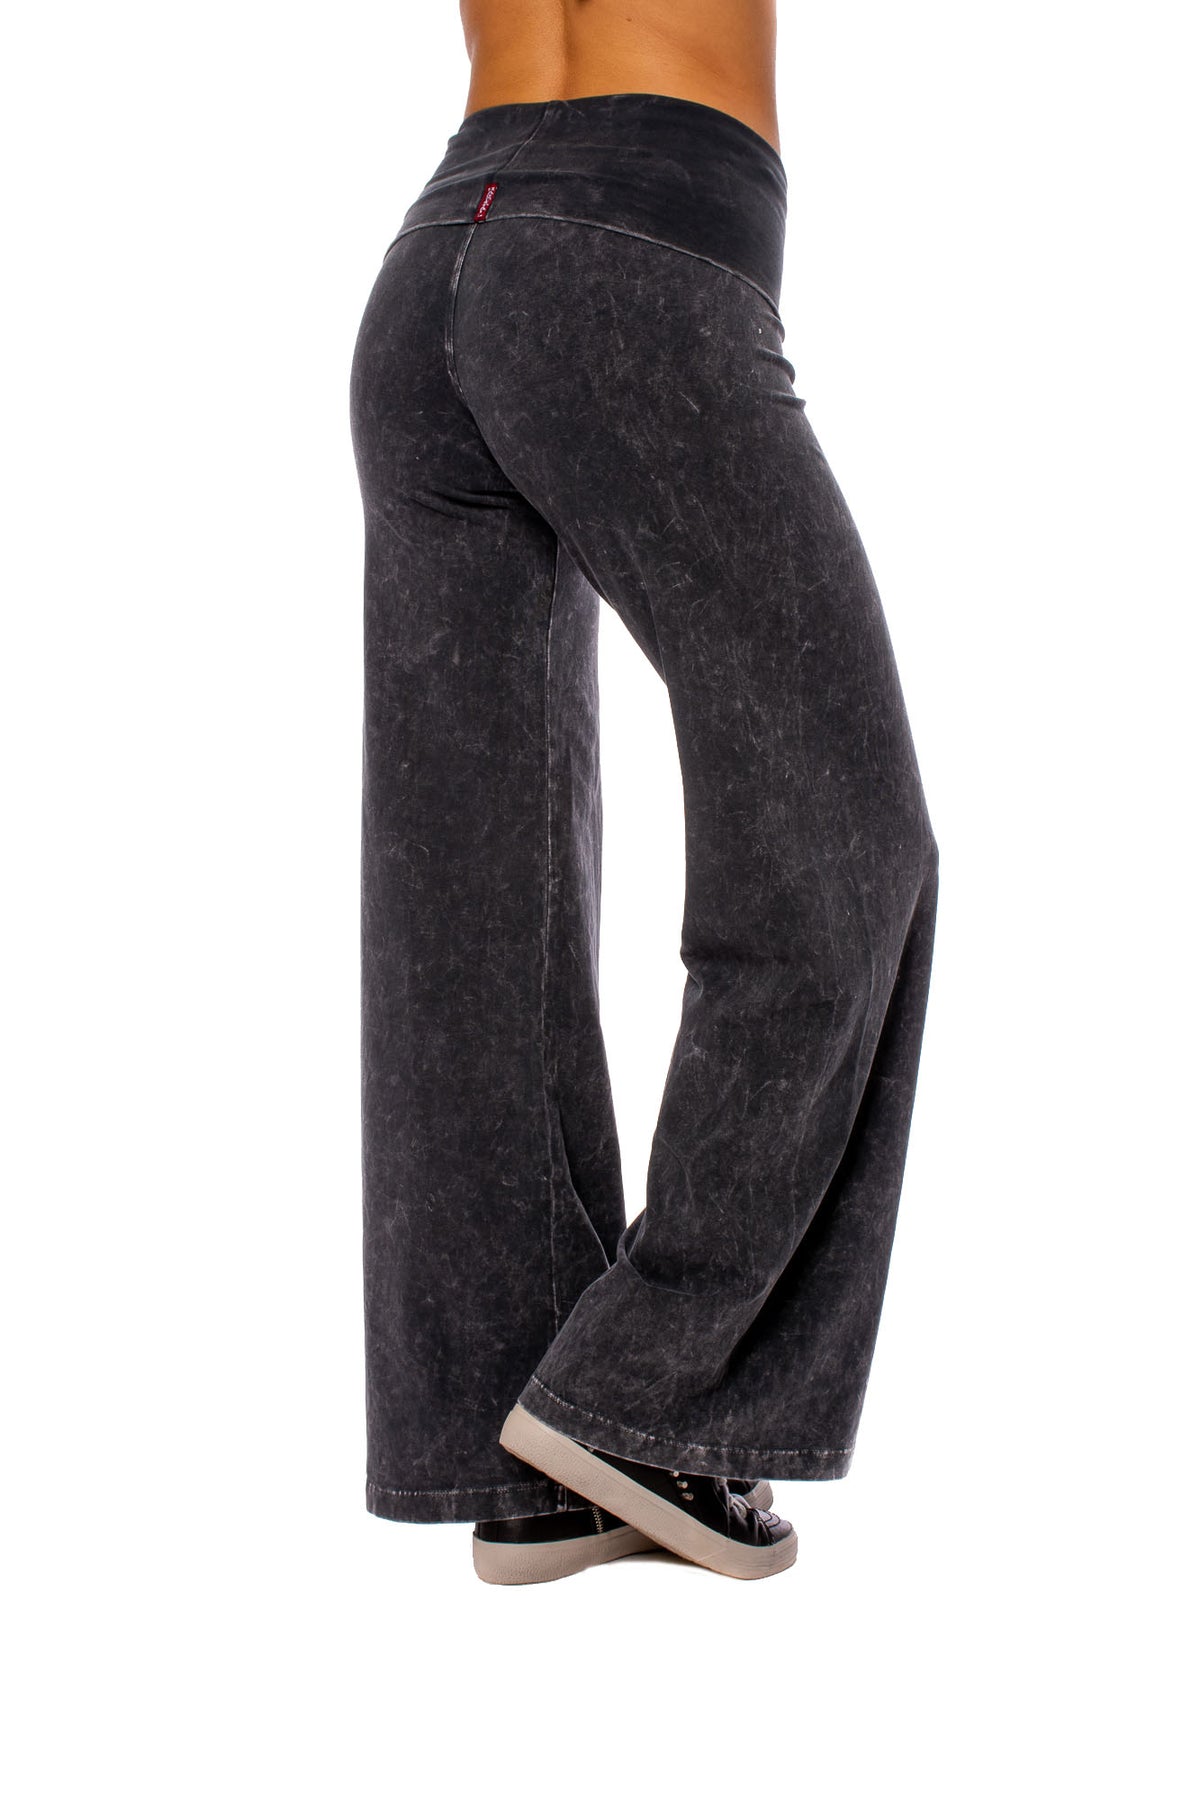 Lipsy Black High Waisted Contour Bootleg Flared Trousers